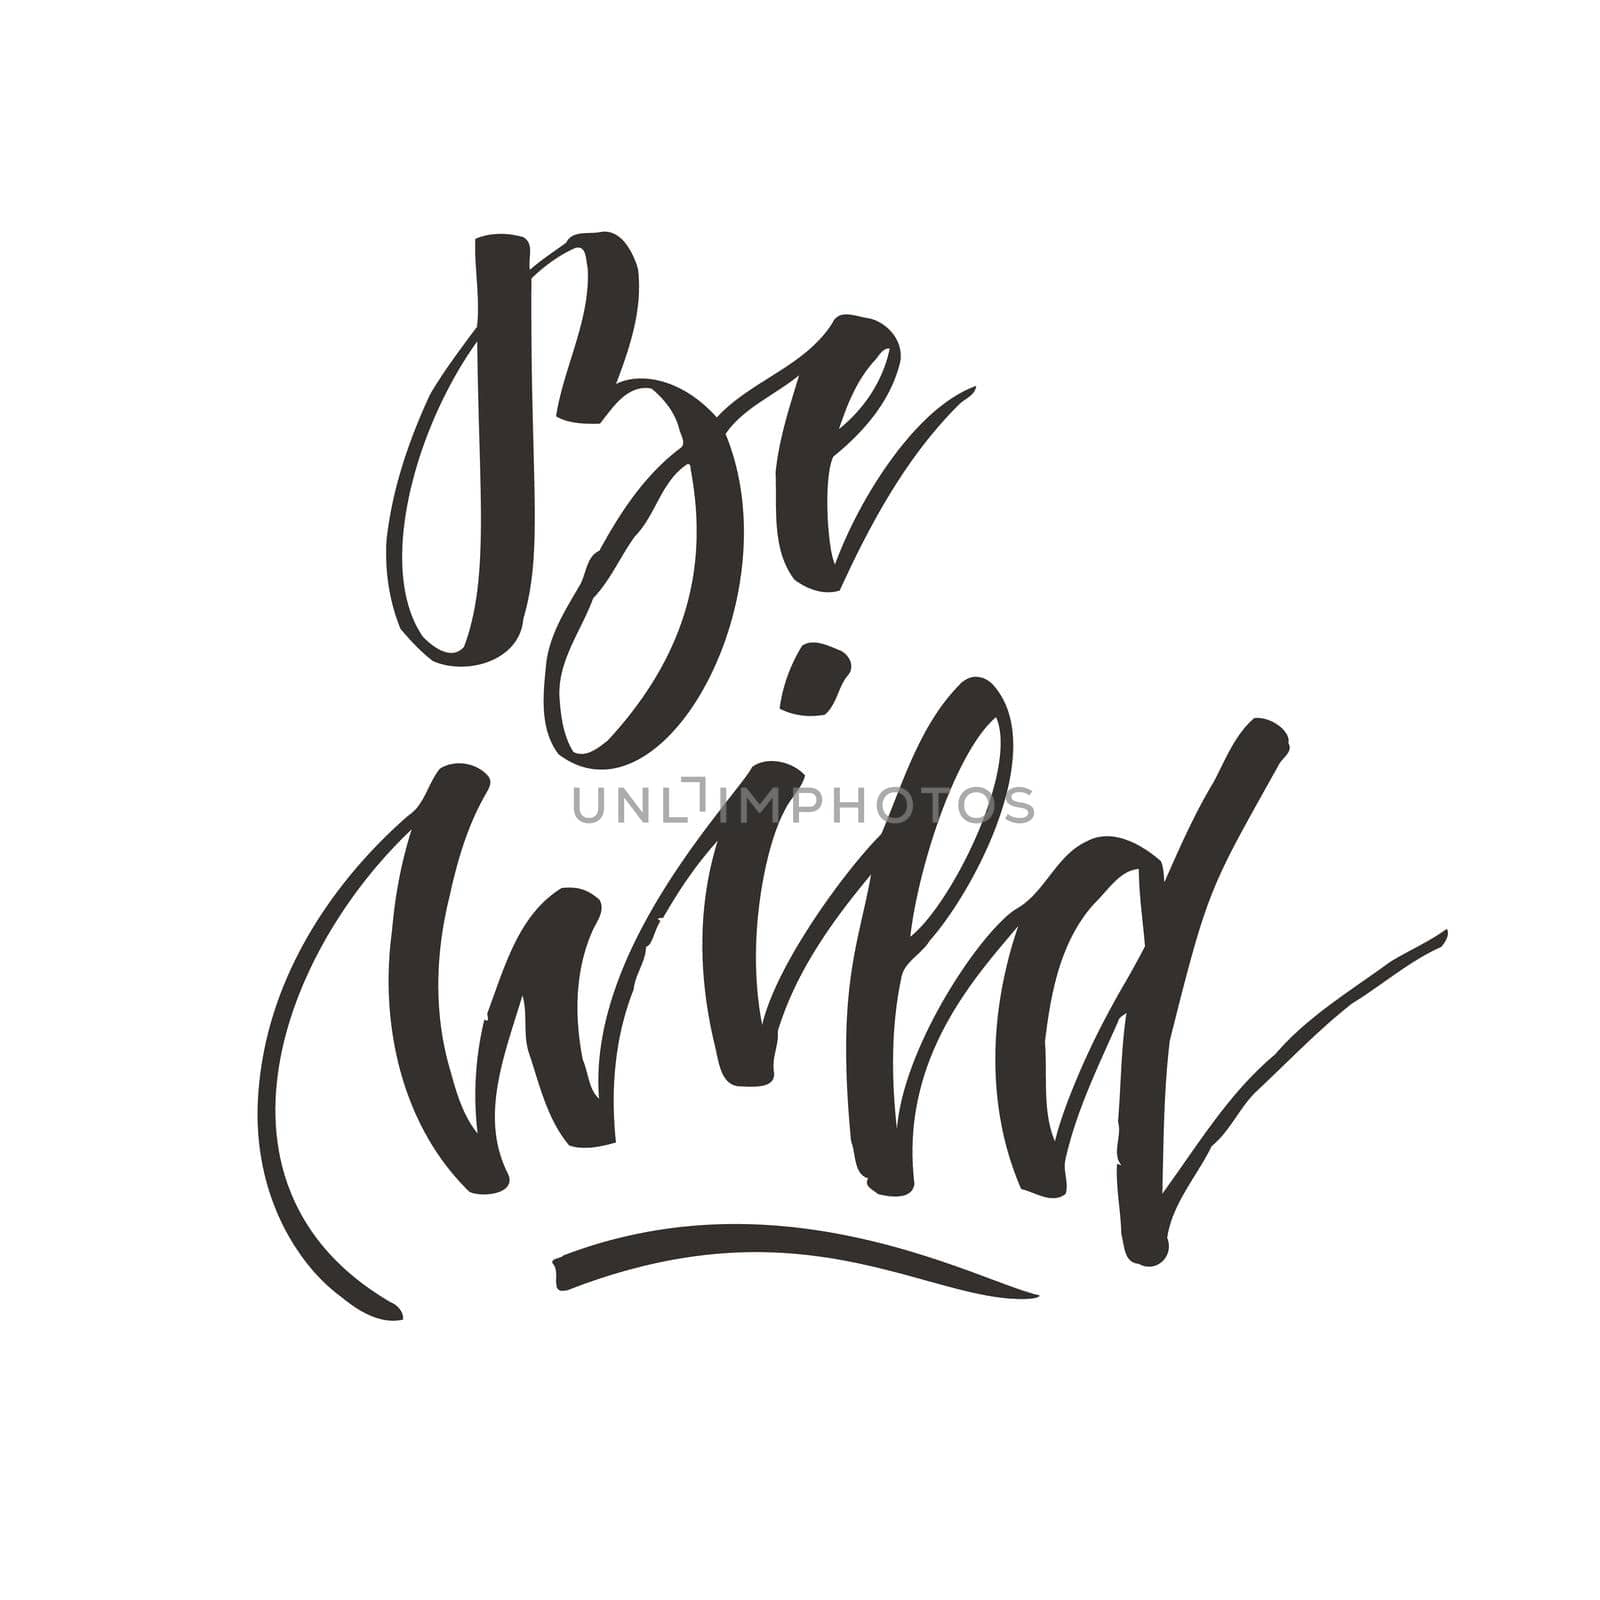 Be wild. Hand lettering isolated on white background. Positive quote. illustration for greeting cards, posters, print on T-shirts and much more.